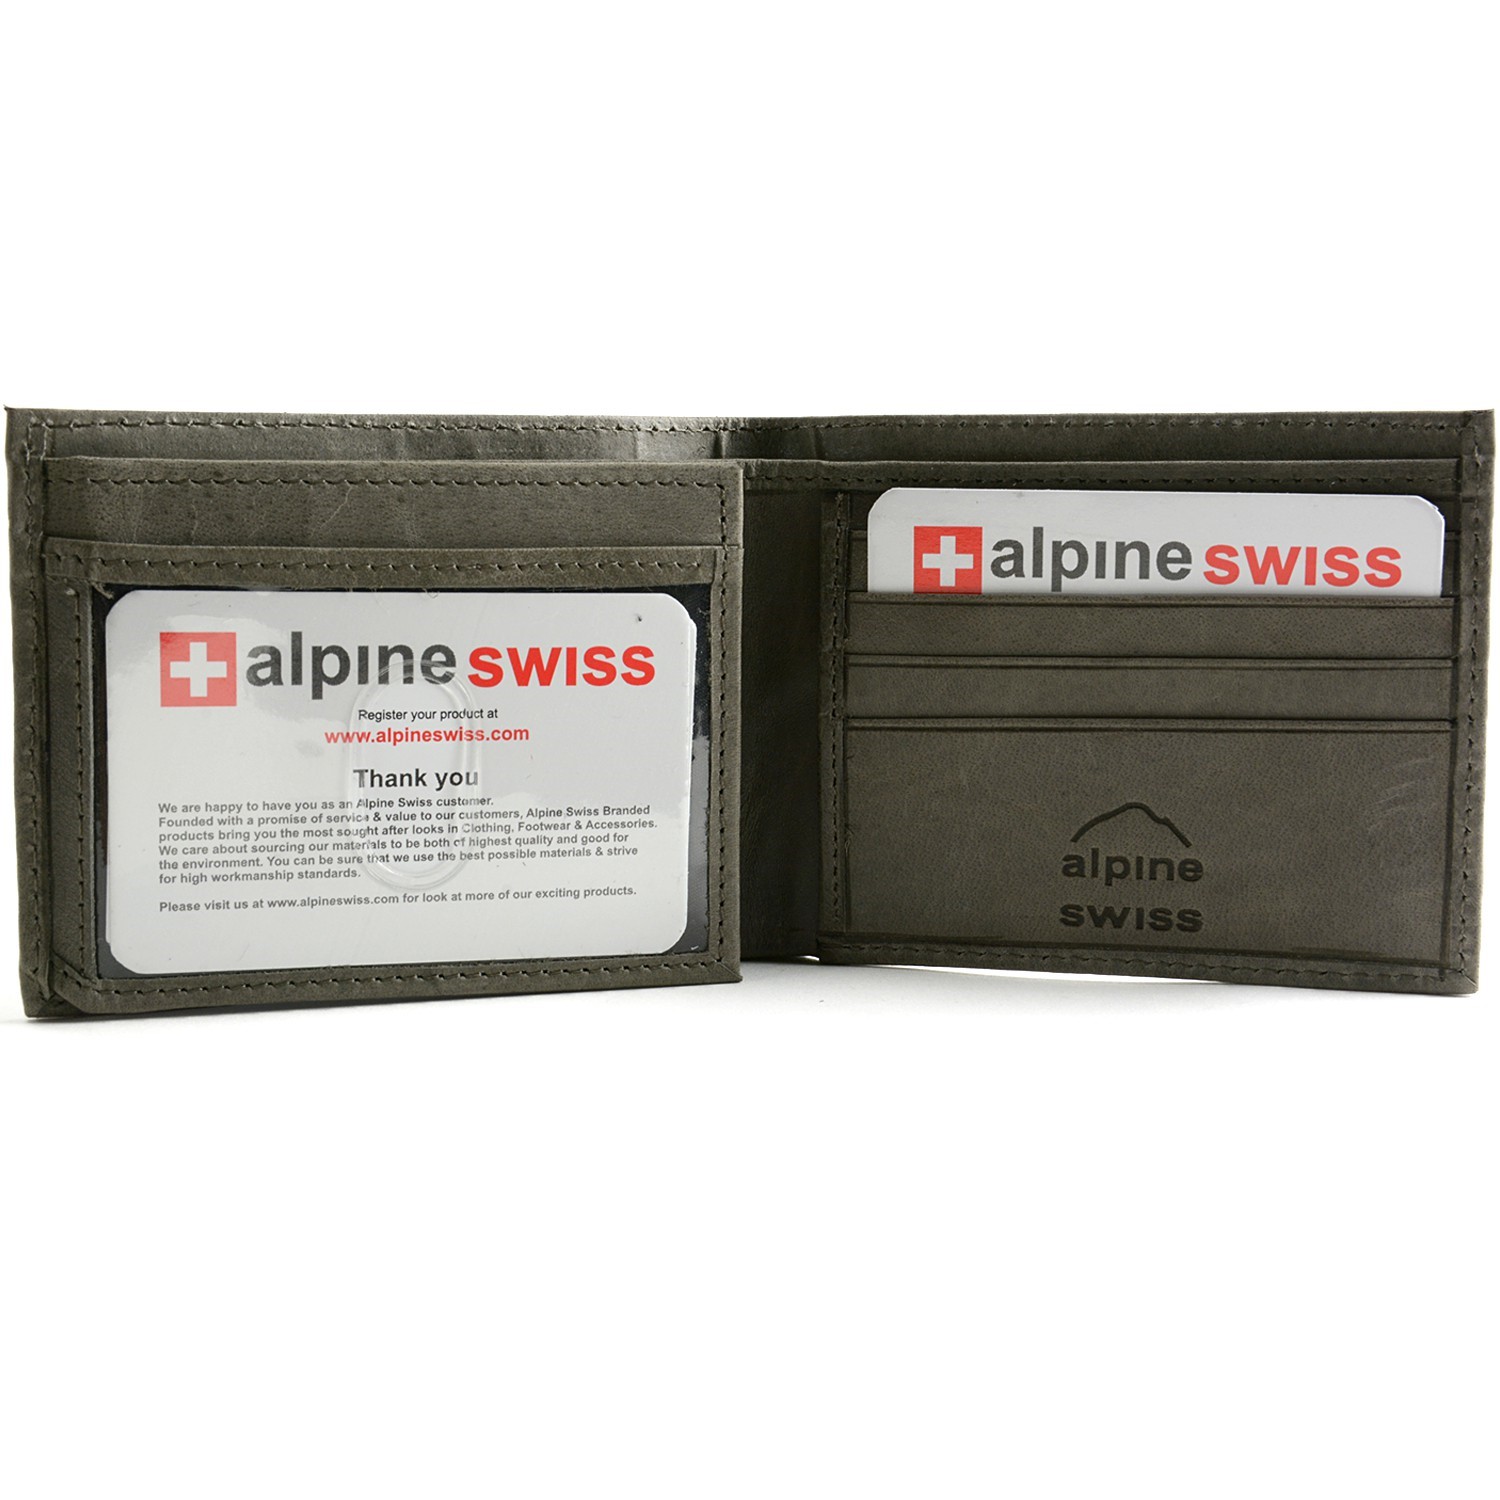 Alpine Swiss Mens Wallet Real Leather Bifold Trifold Hybrid Foldout ID Card Case - image 4 of 4